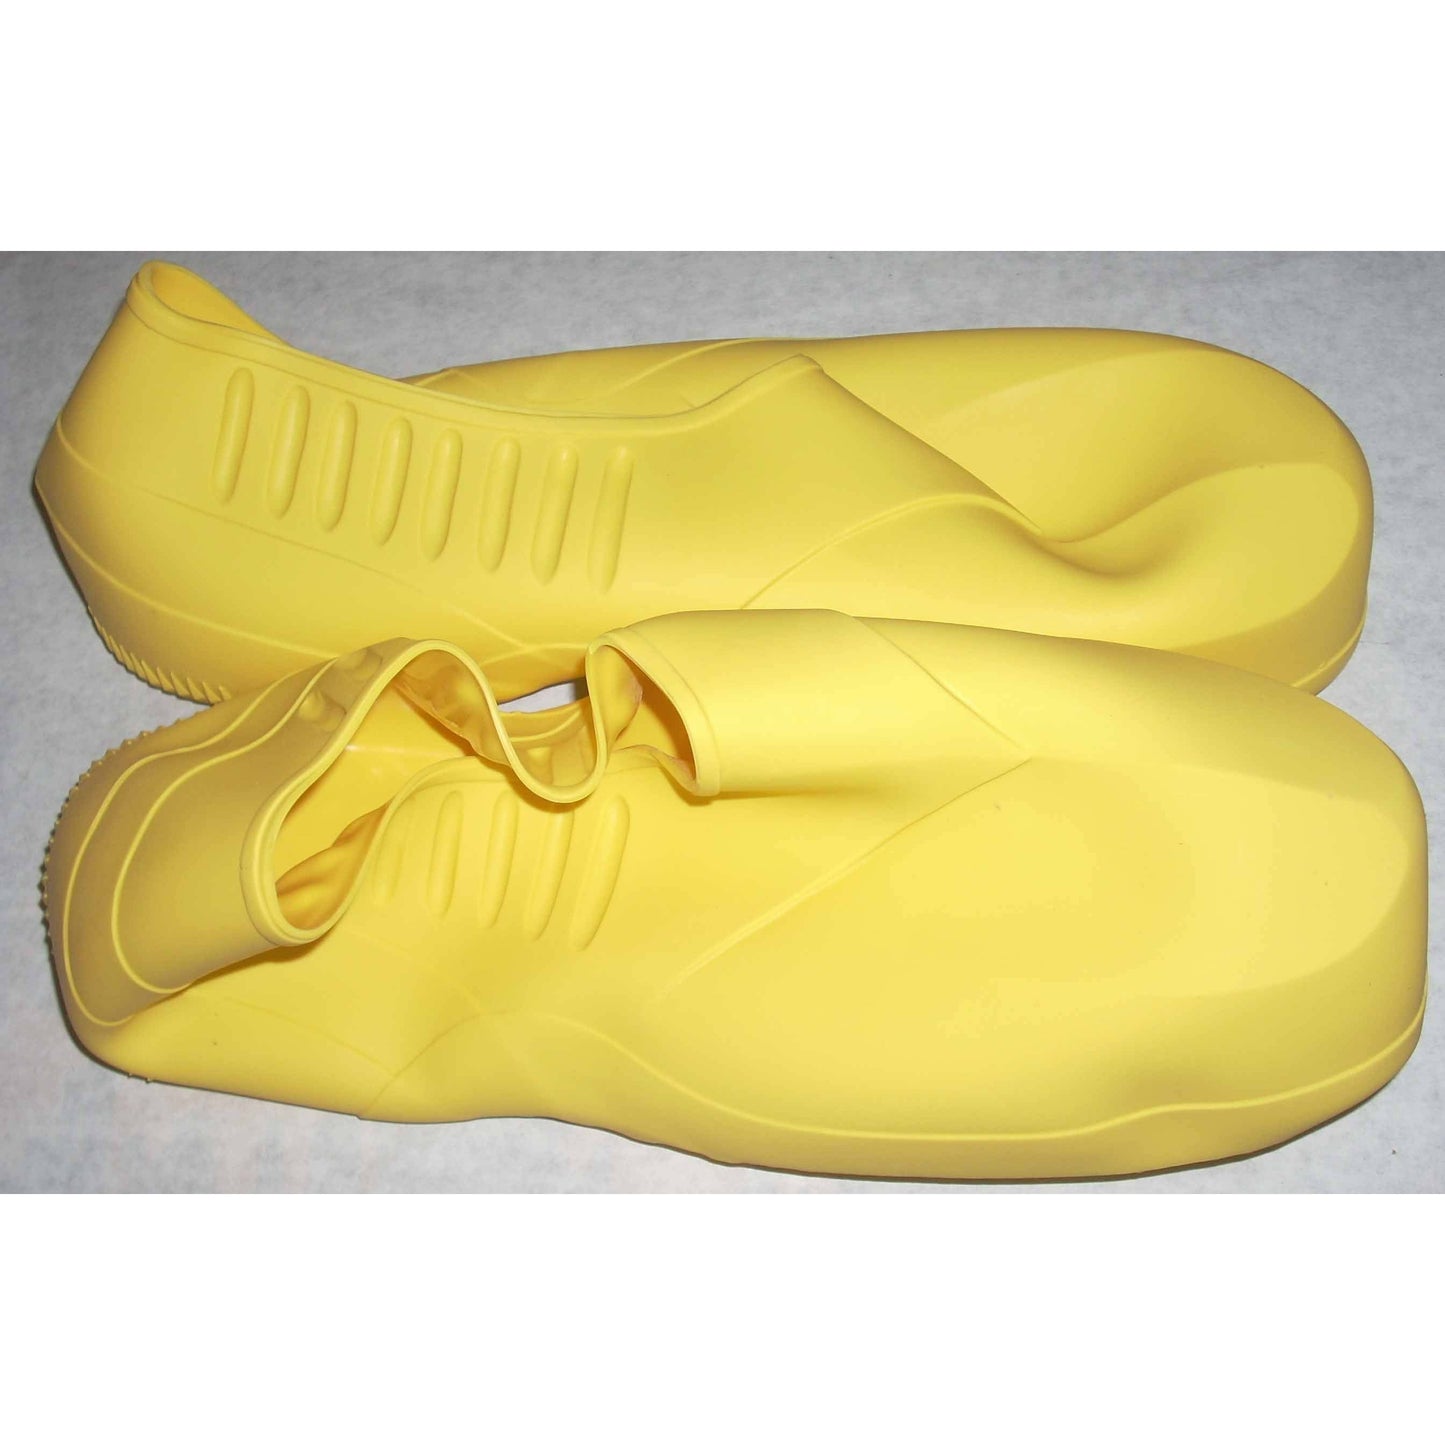 Lacrosse 88103 Men's Packer Yellow Overshoe Size XL 11-12 1/2 USA Made